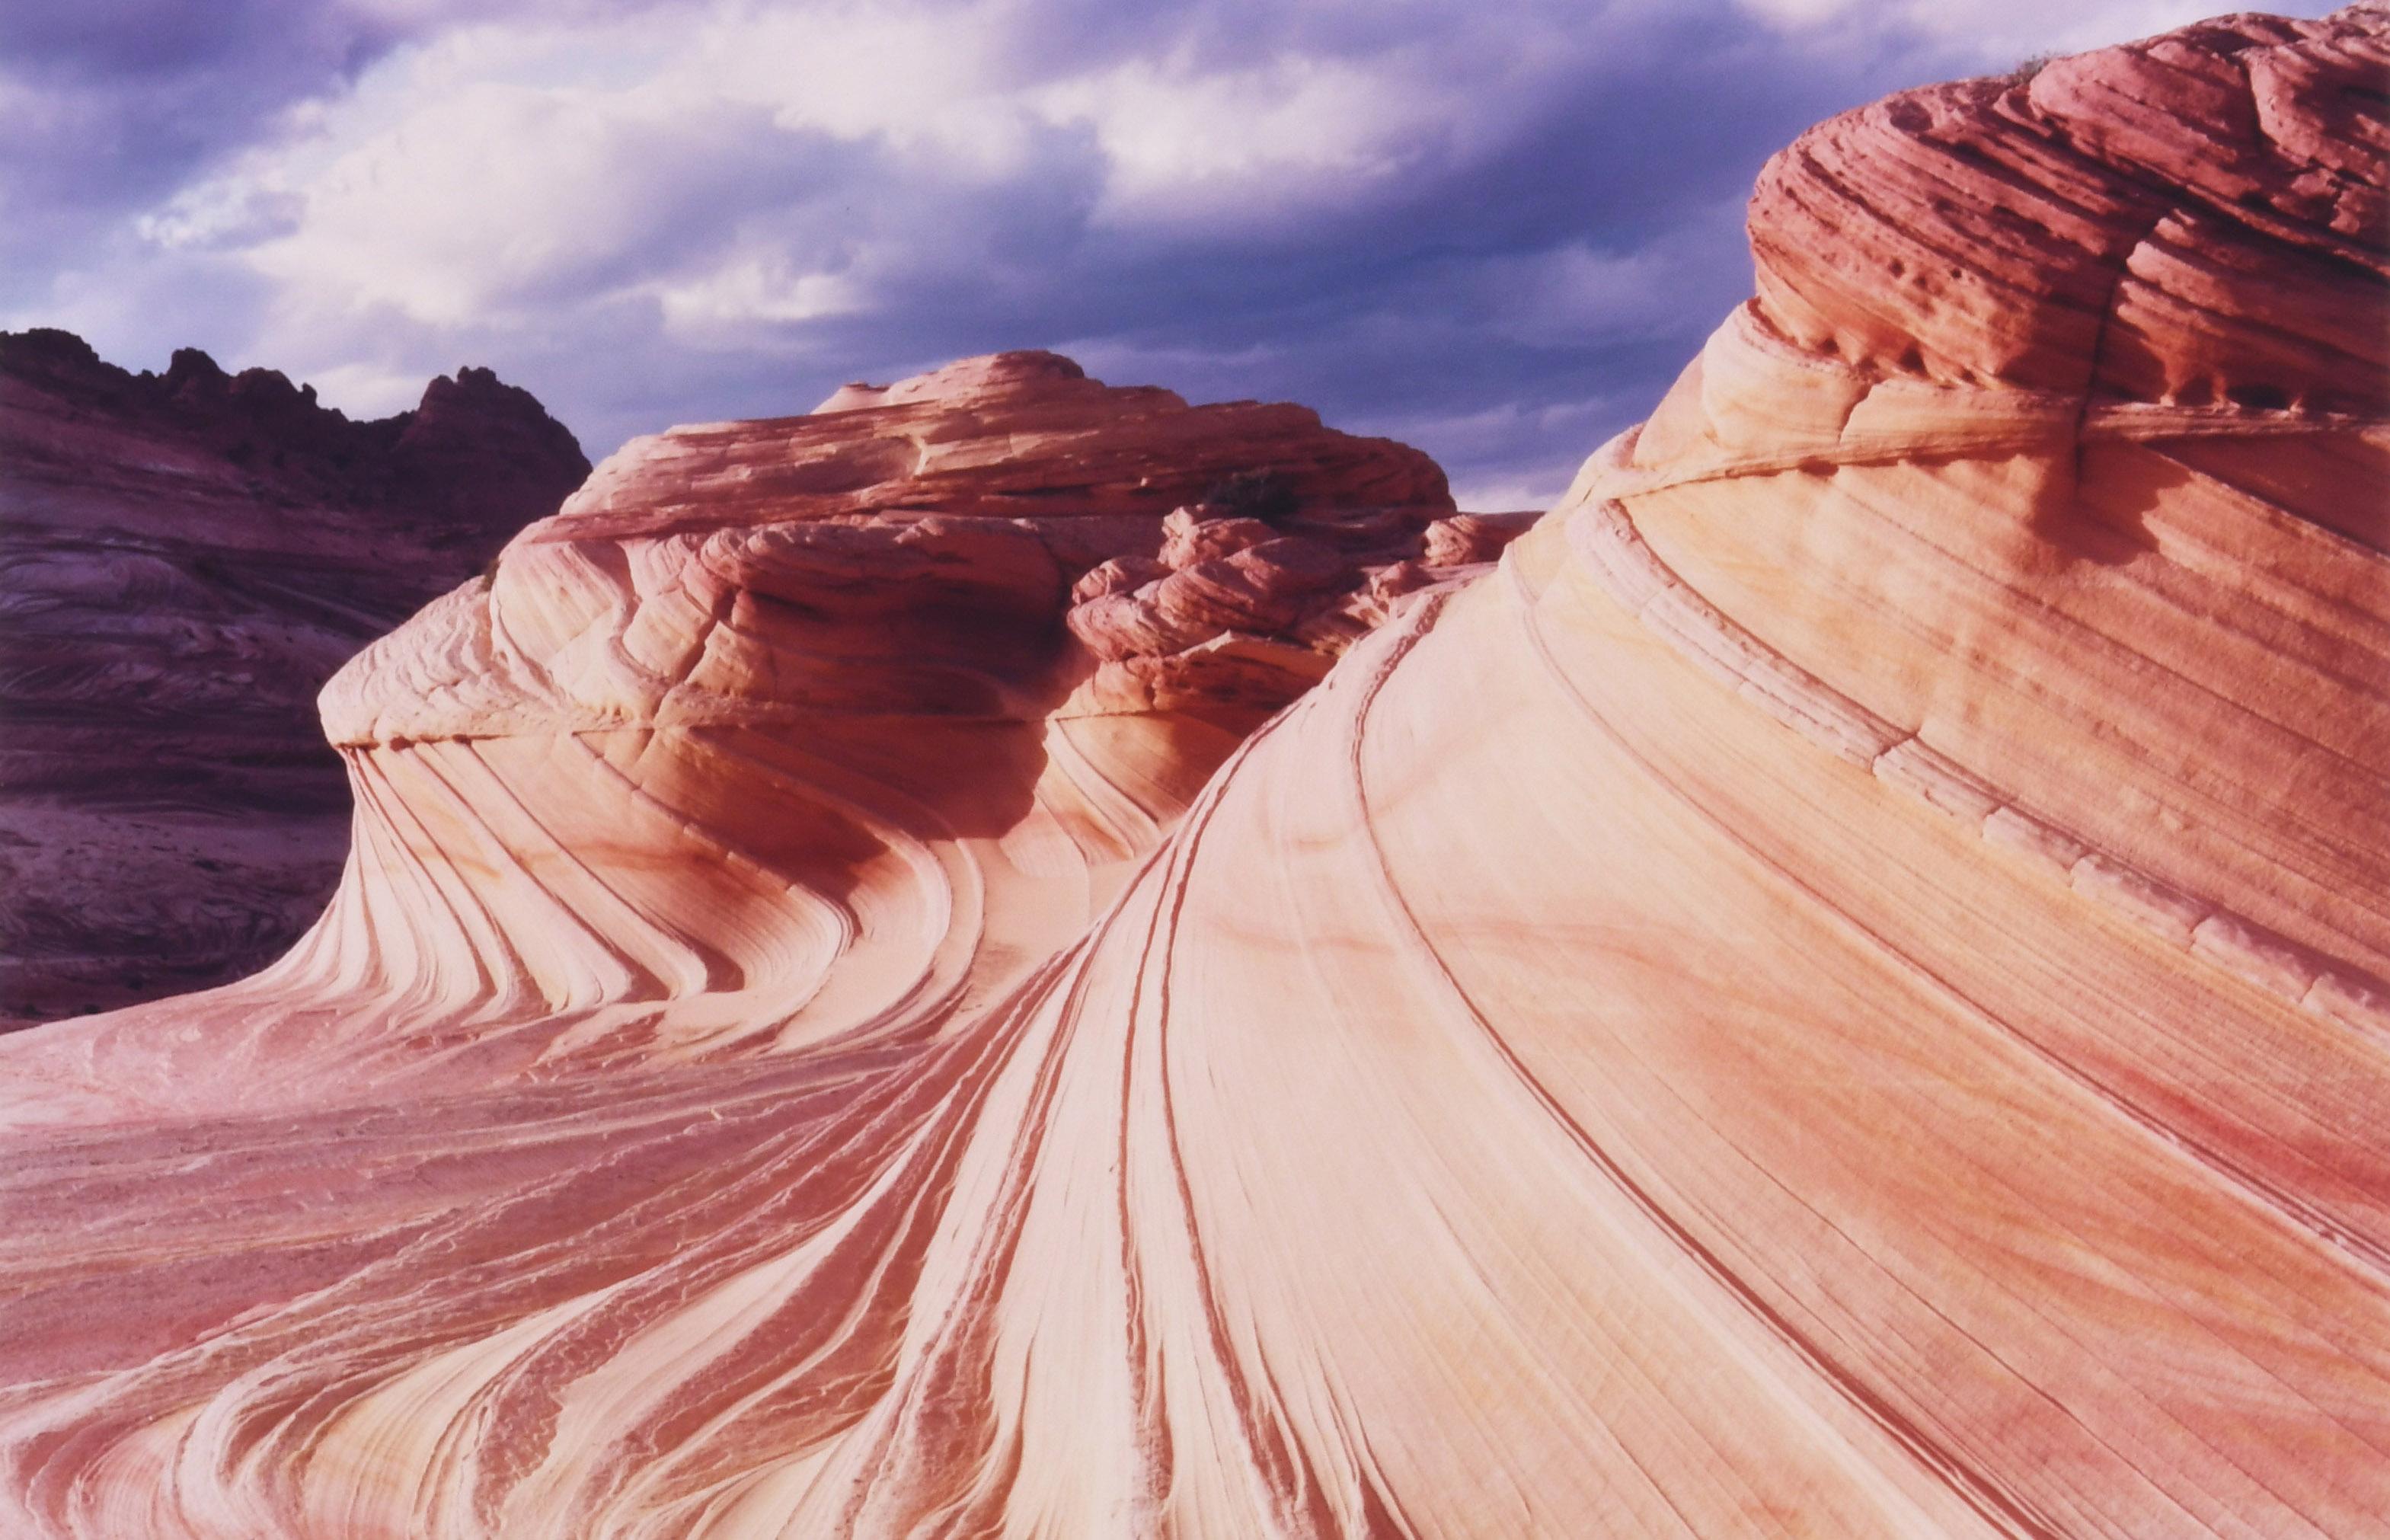 The Second Wave, Coyote Buttes, Paria Canyon-Vermilion Clifts Wilderness, AR - Naturalistic Photograph by Unknown